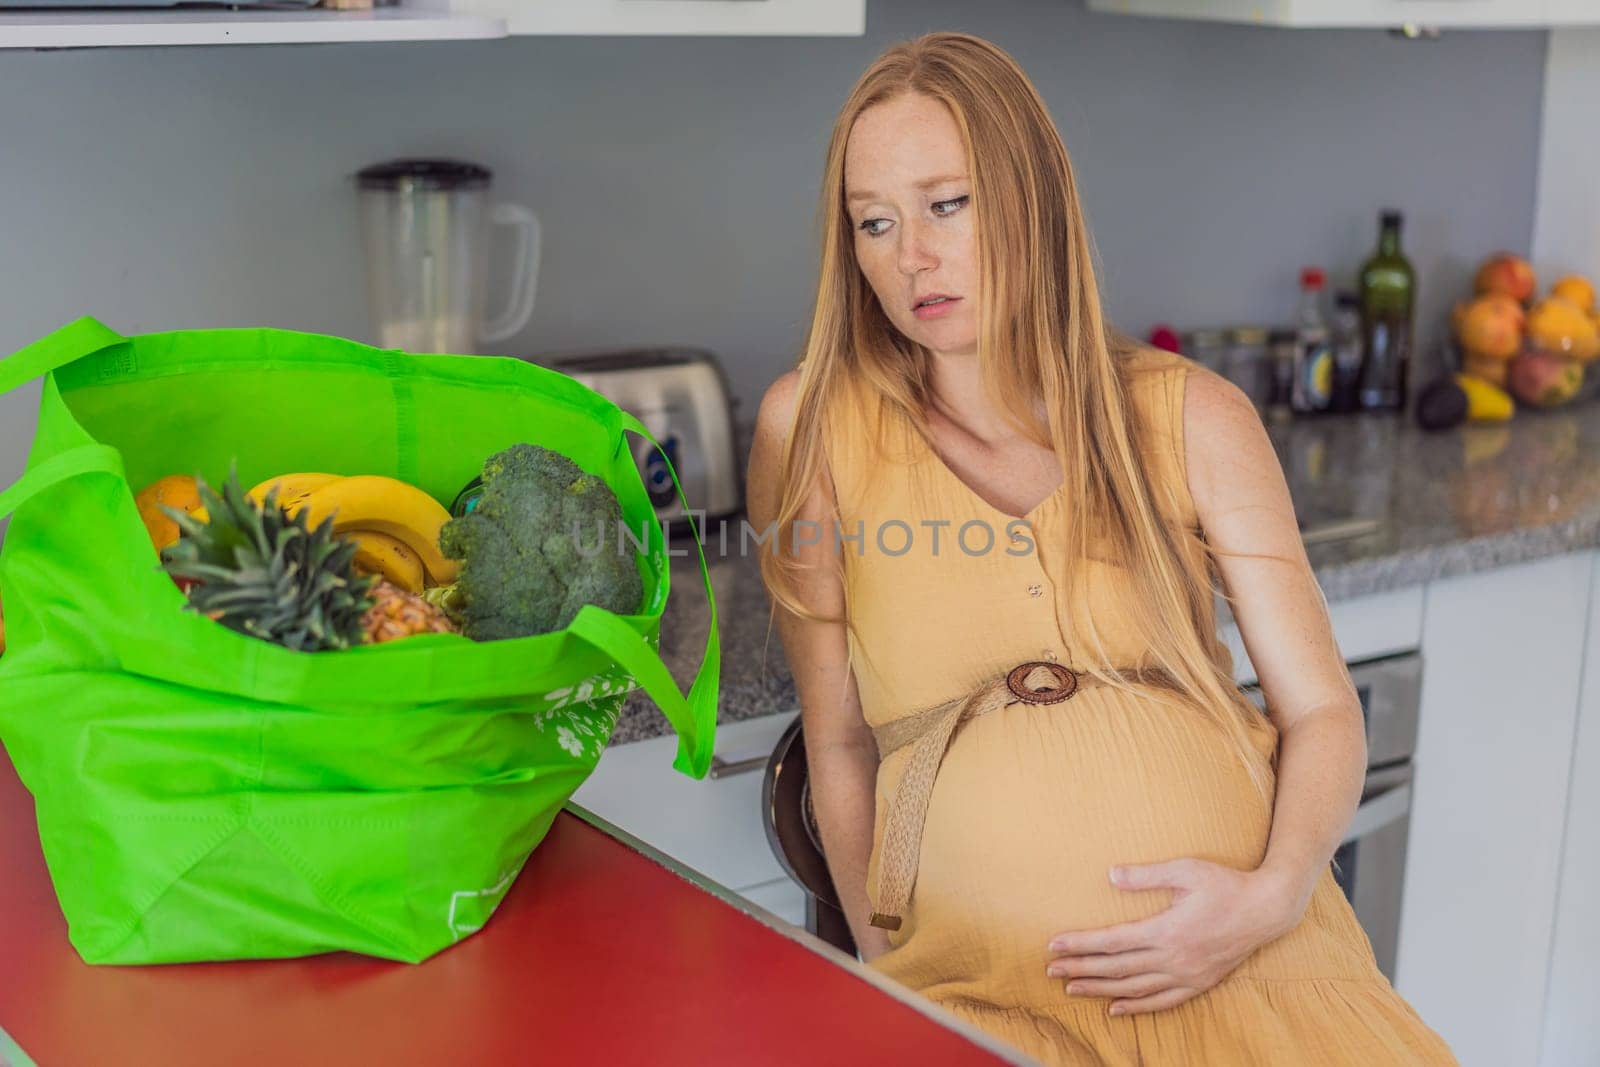 Exhausted but resilient, a pregnant woman feels fatigue after bringing home a sizable bag of groceries, showcasing her dedication to providing nourishing meals for herself and her baby by galitskaya